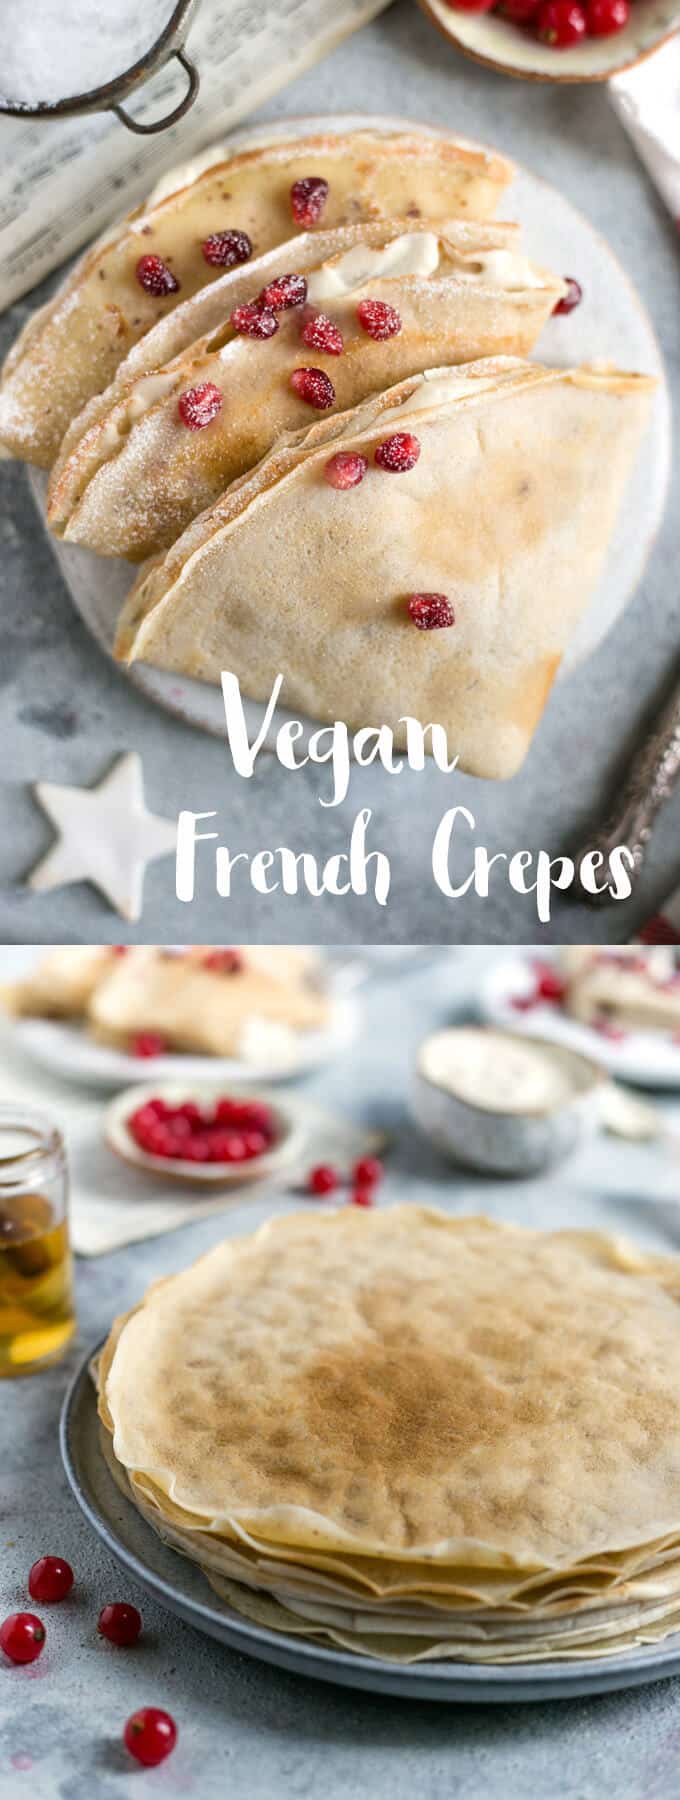 Classic French crepes recipe, perfect as a breakfast or dessert! #vegan #crepes #dairyfree | via @annabanana.co